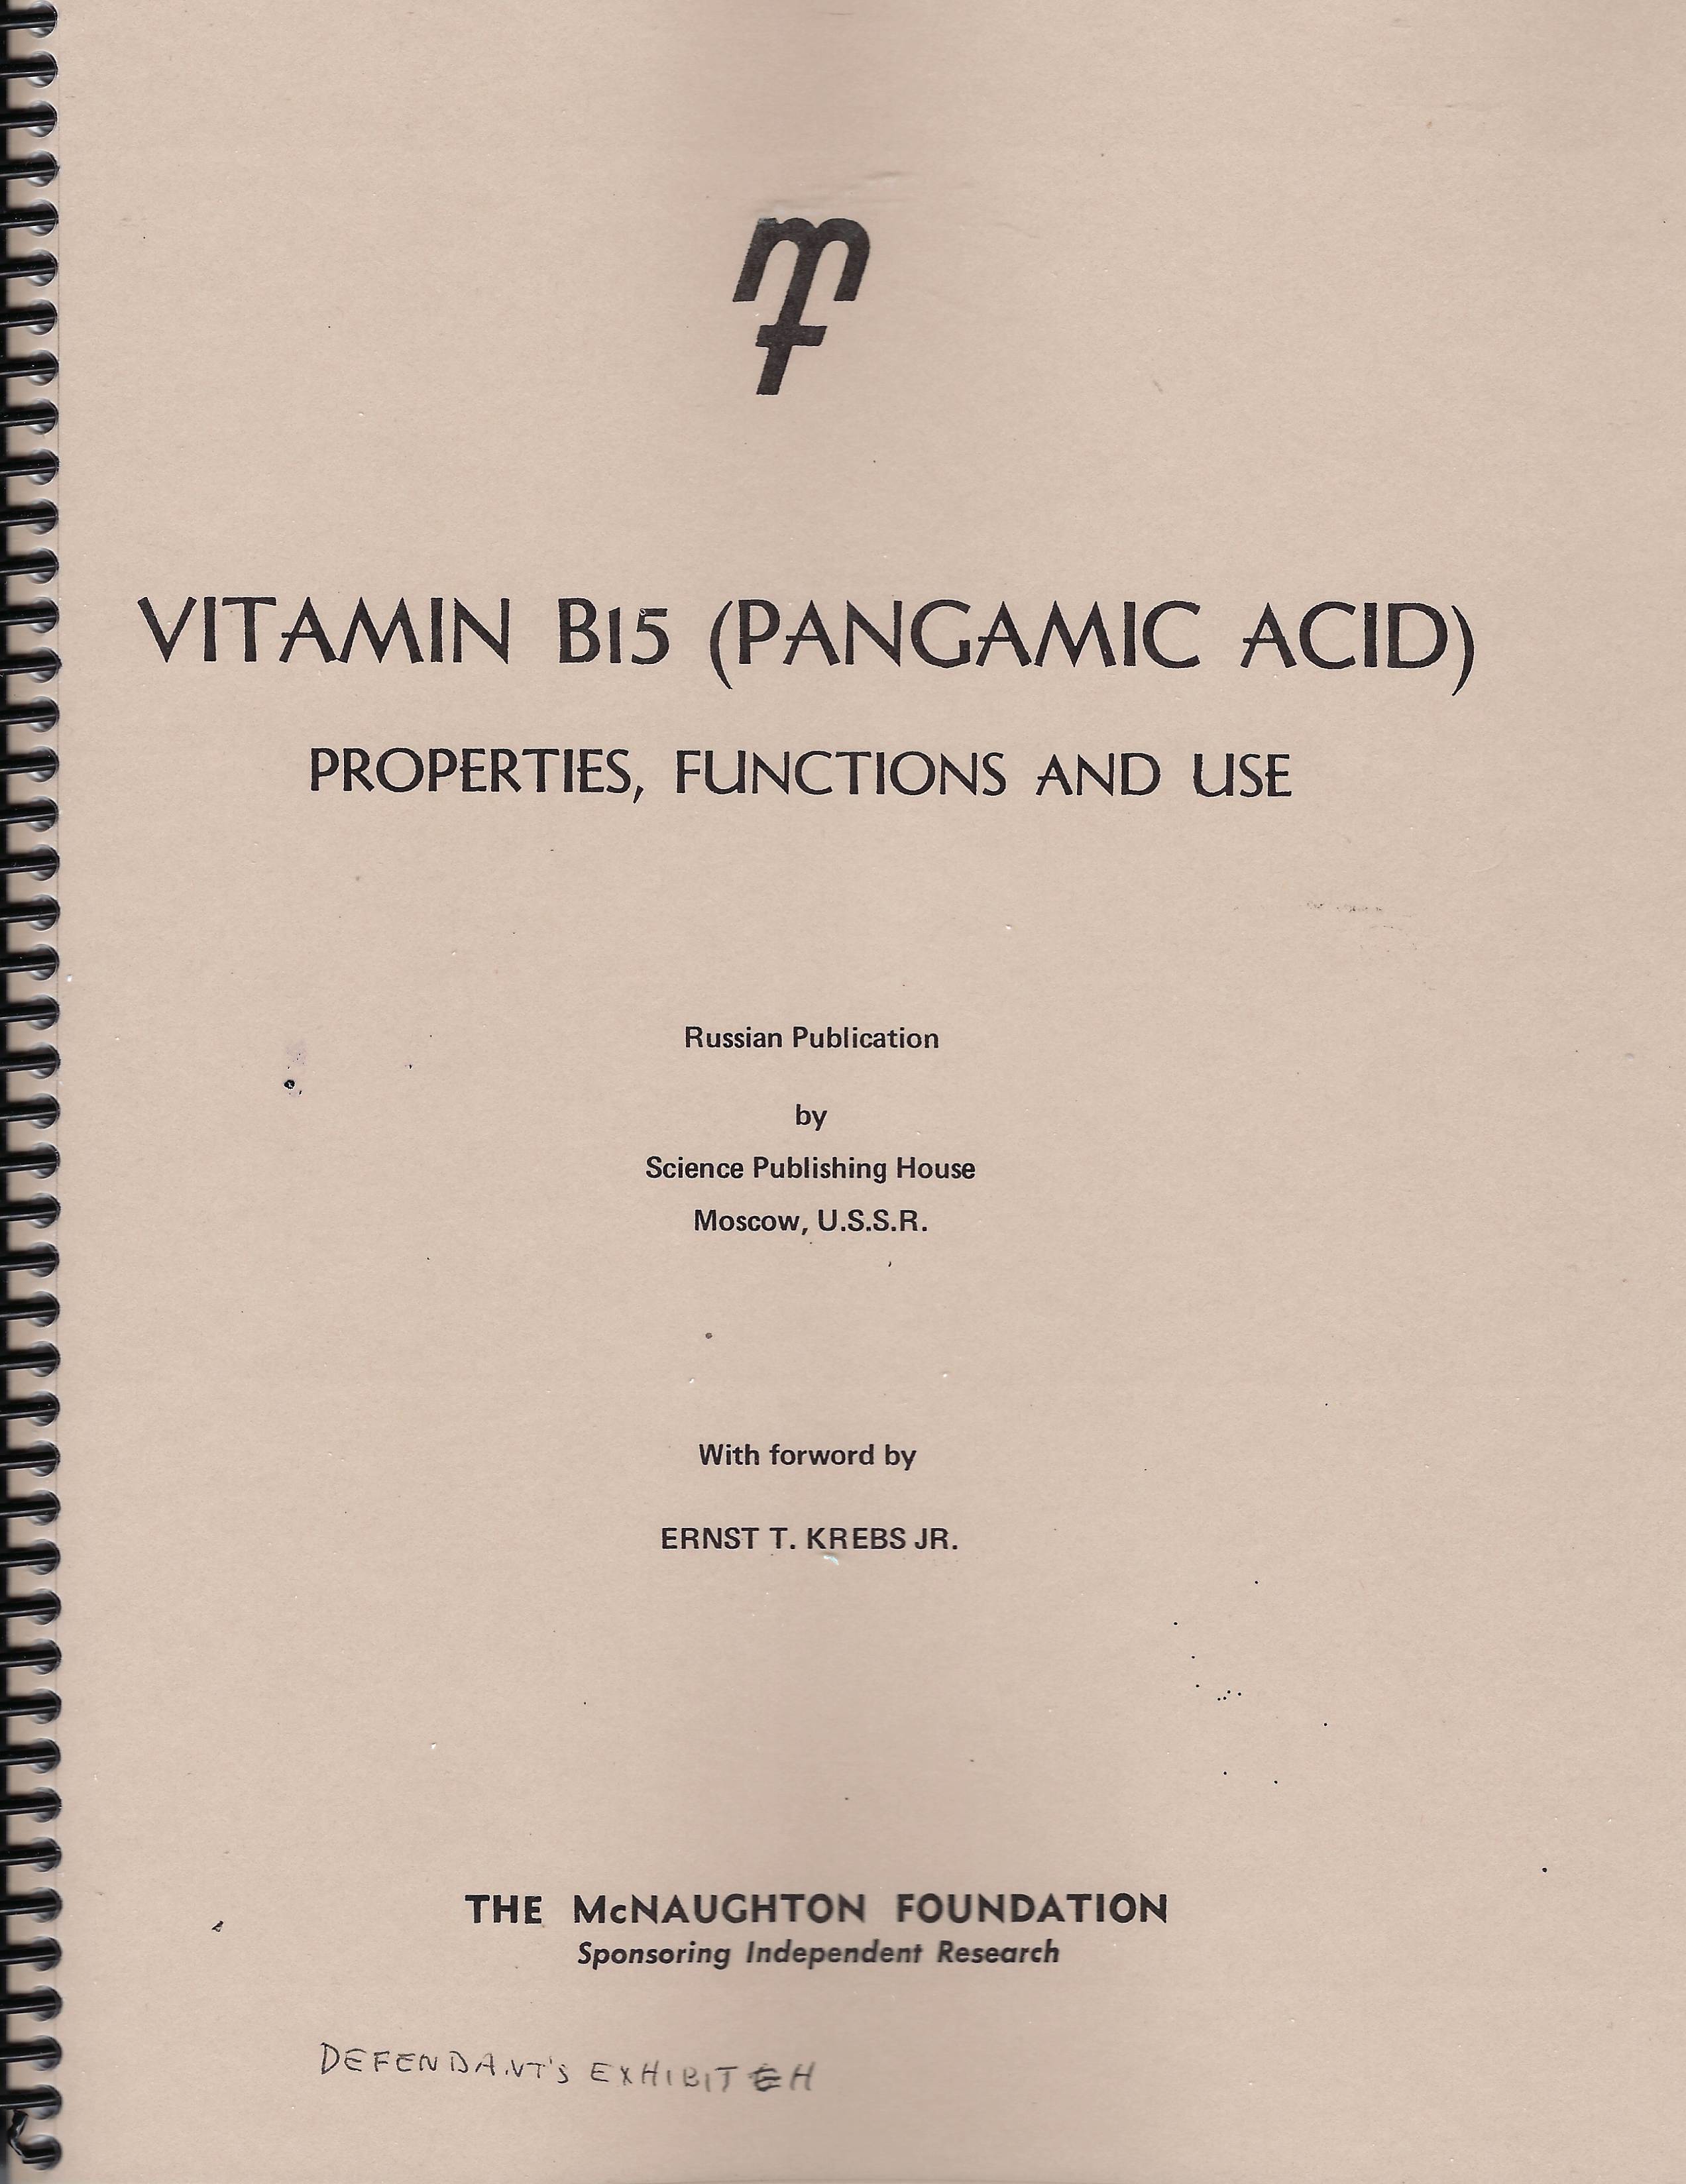 (Book) Vitamin B15 (Pangamic Acid) Properties, Functions and Use (206 pages)